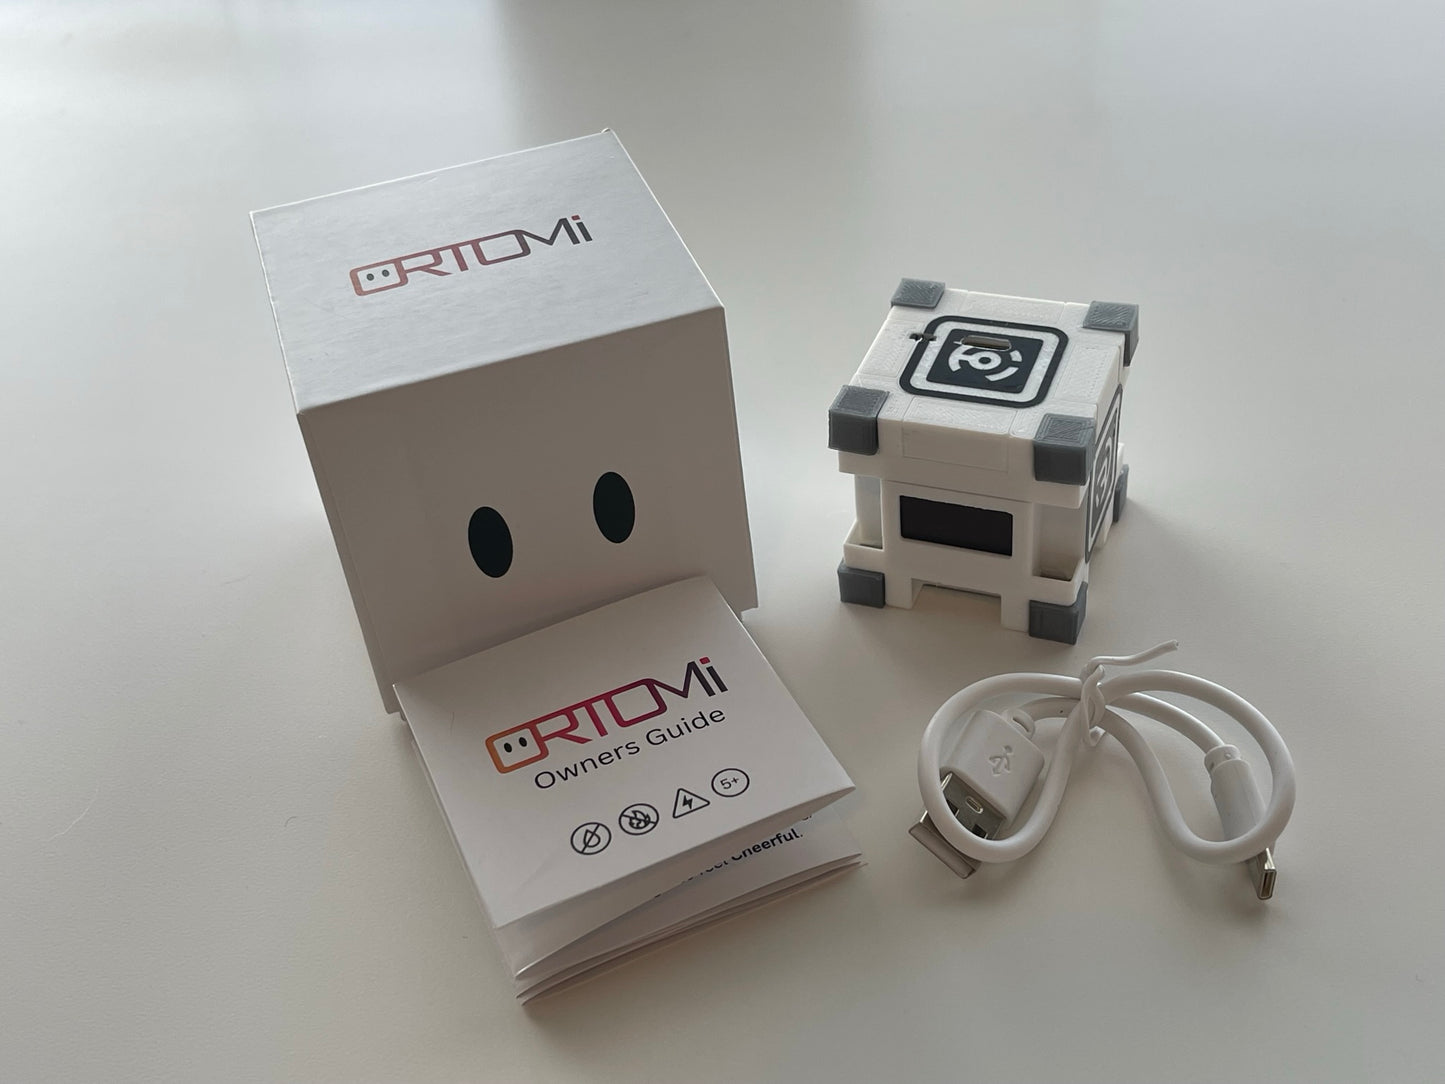 Vectomi Cube - Available Now!